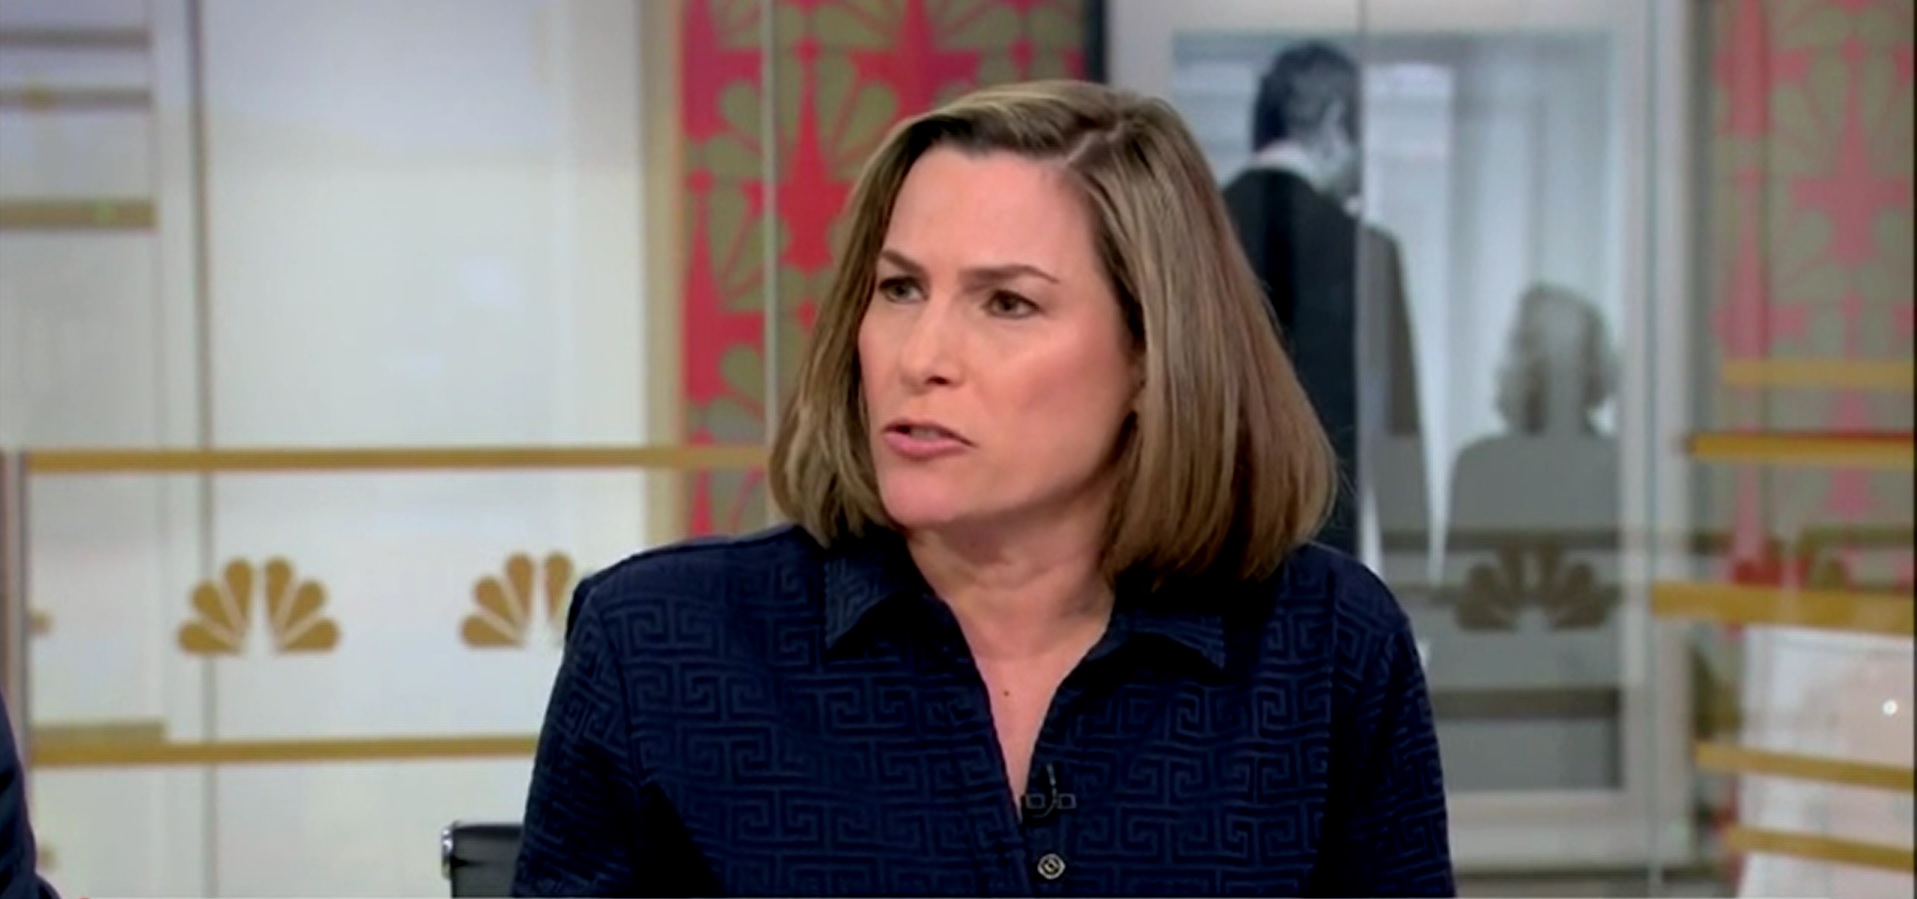 MSNBC Analyst Wants Police ‘Turning Their Back’ On Republicans Over Gun Control